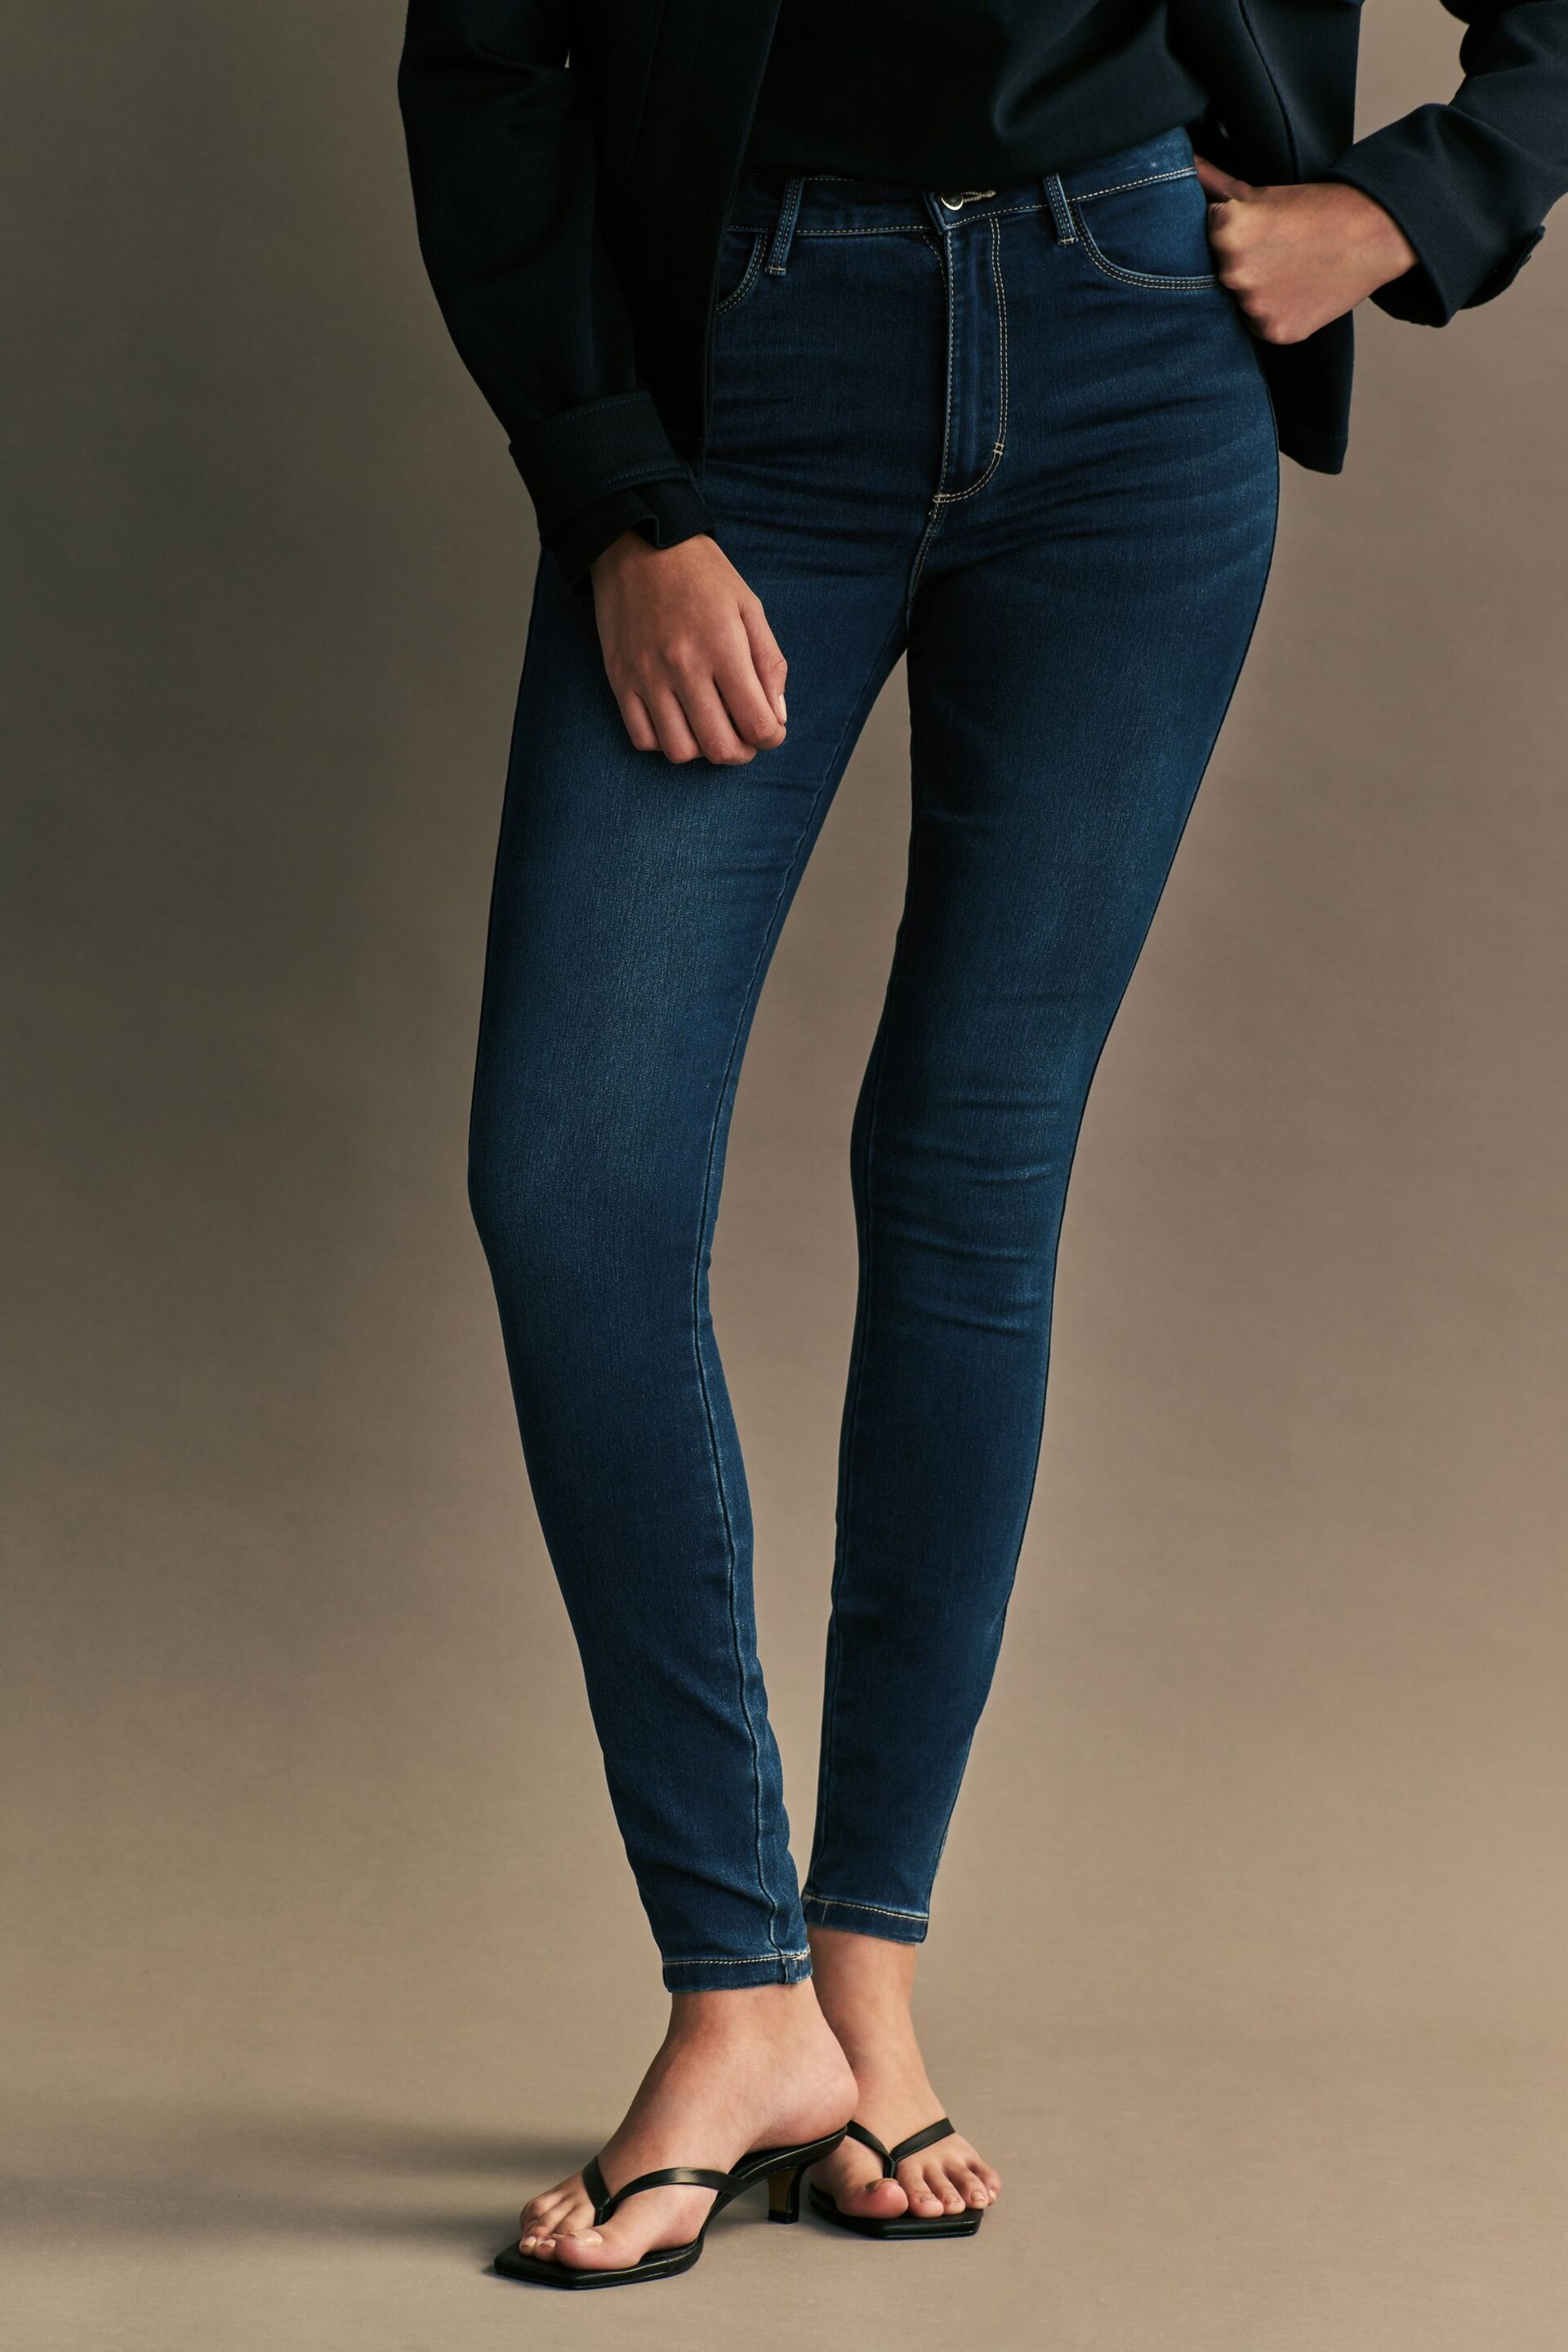 ONLY Blue High Waisted Stretch Skinny Royal Jeans - Image 1 of 7